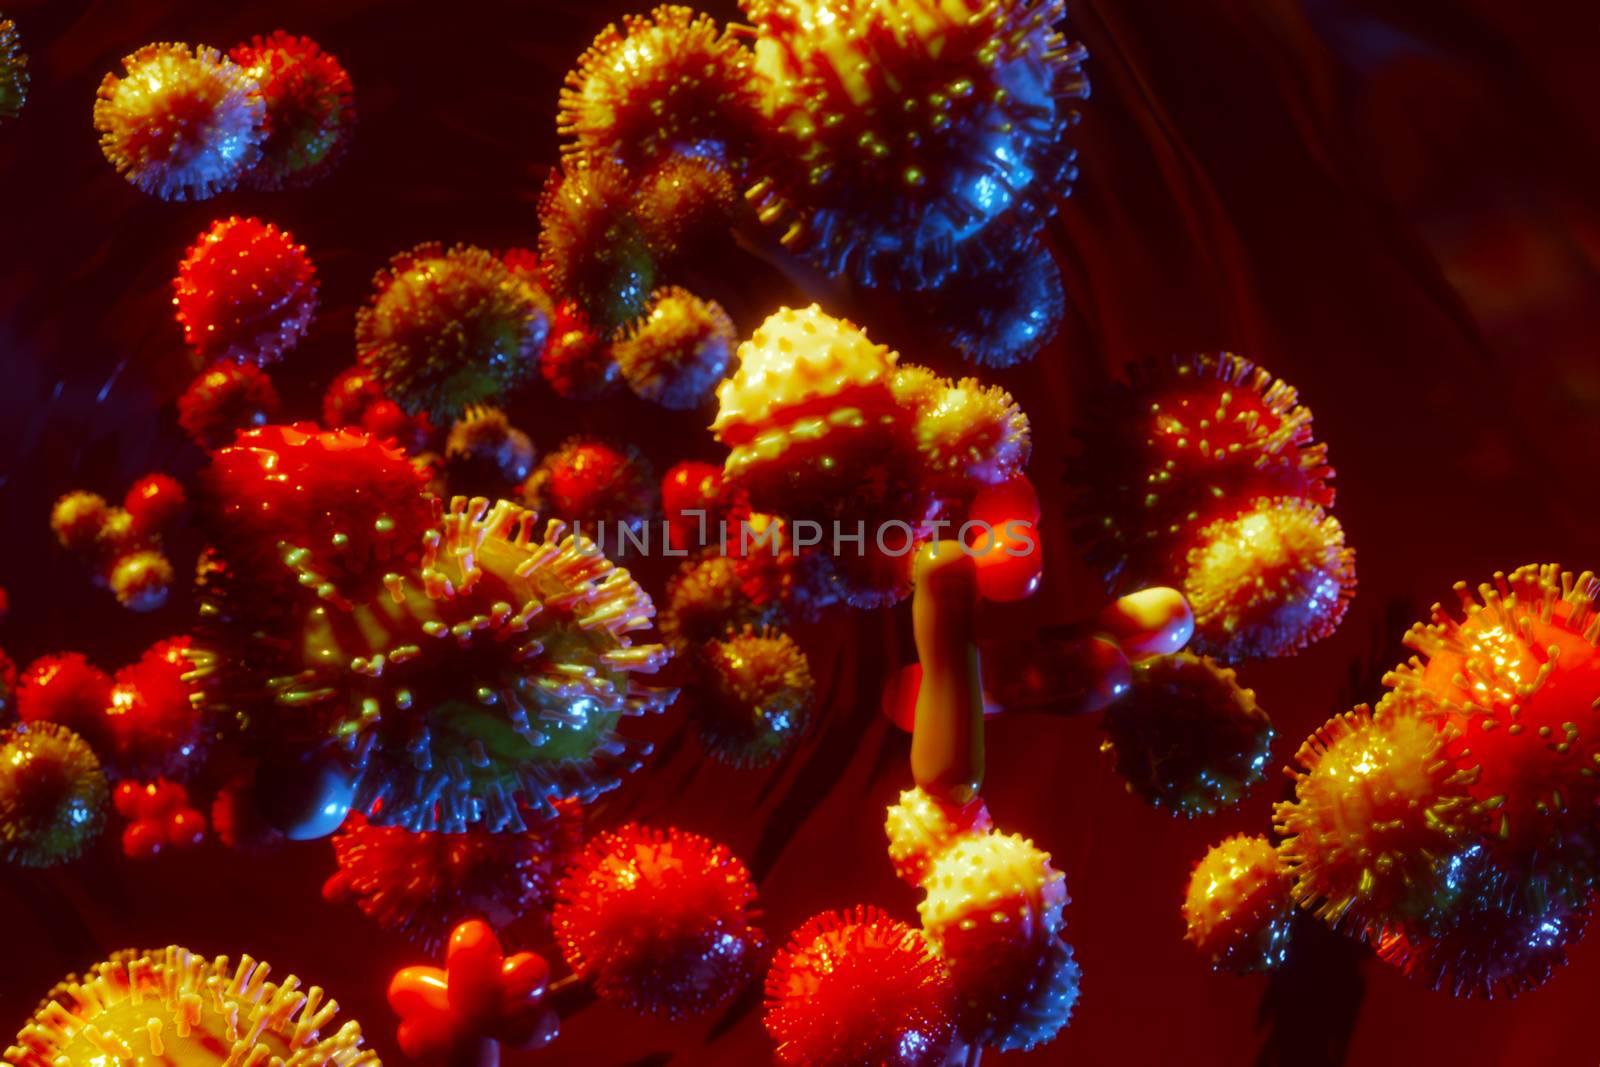 Bacteria, virus or other pathogen cell in blood stream by DCStudio